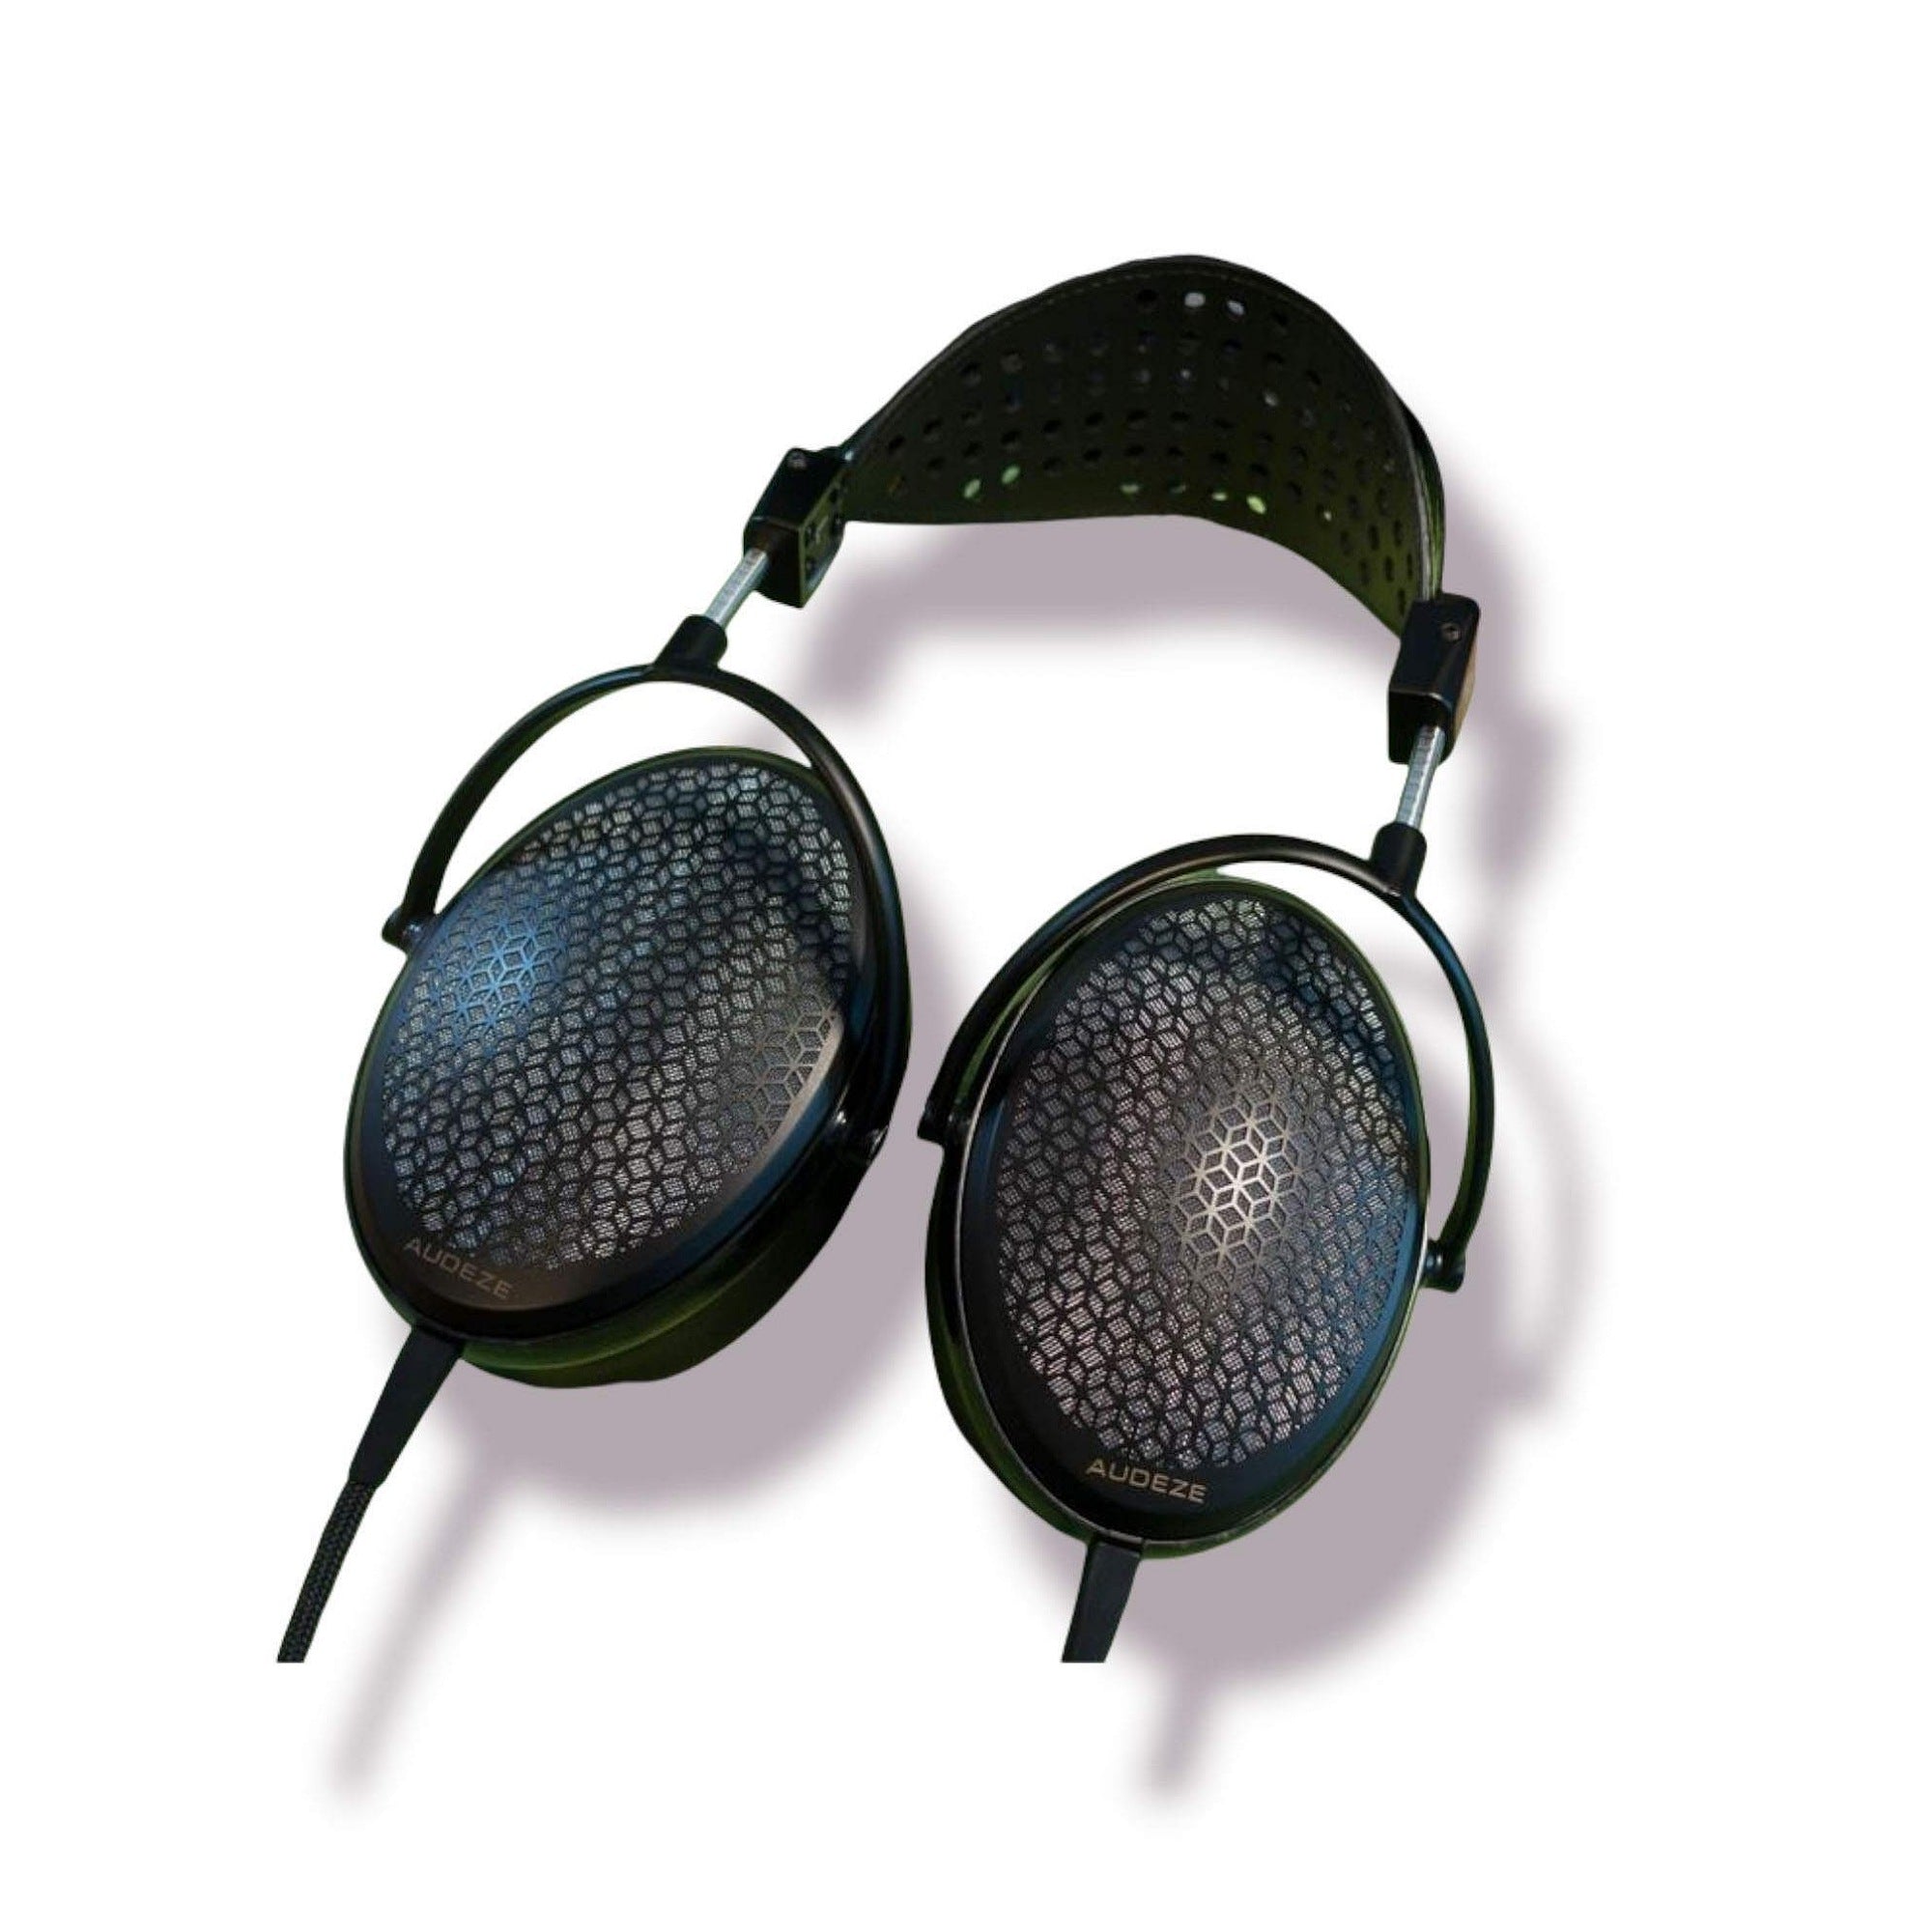 First Impressions of Audeze CRBN From Spritzer